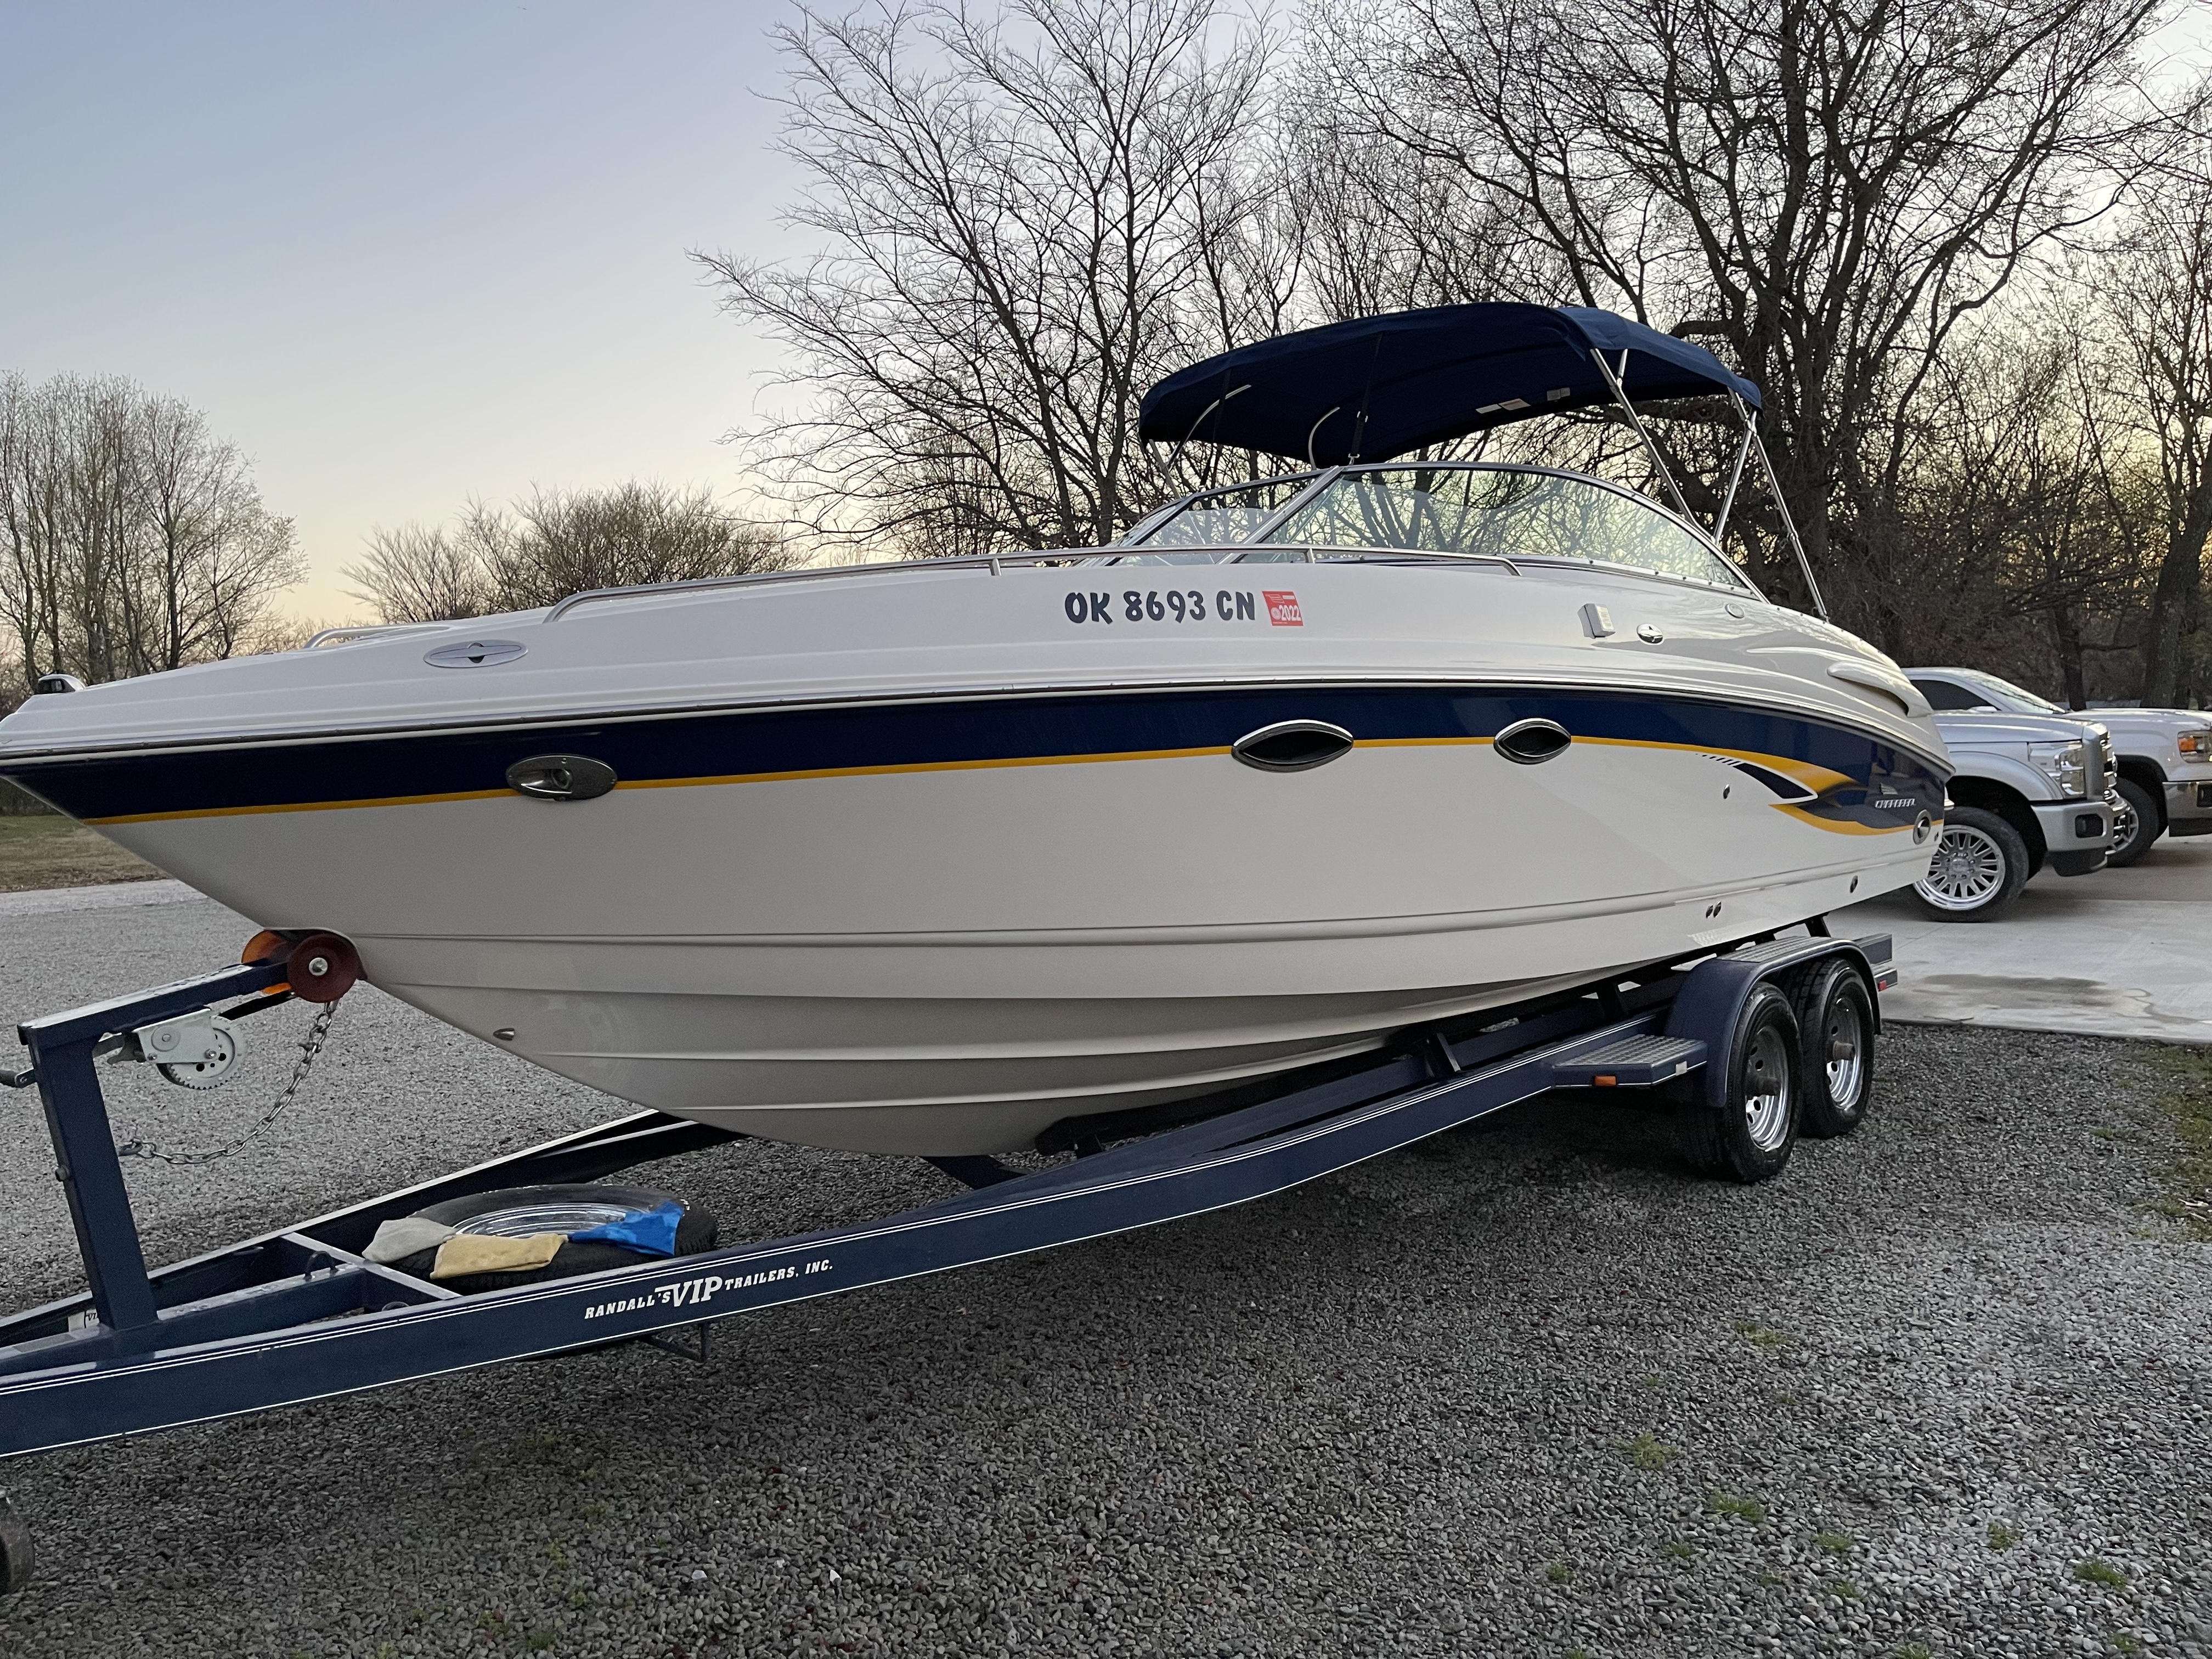 2003 Chaparral 265ssi Power boat for sale in Checotah, OK - image 8 